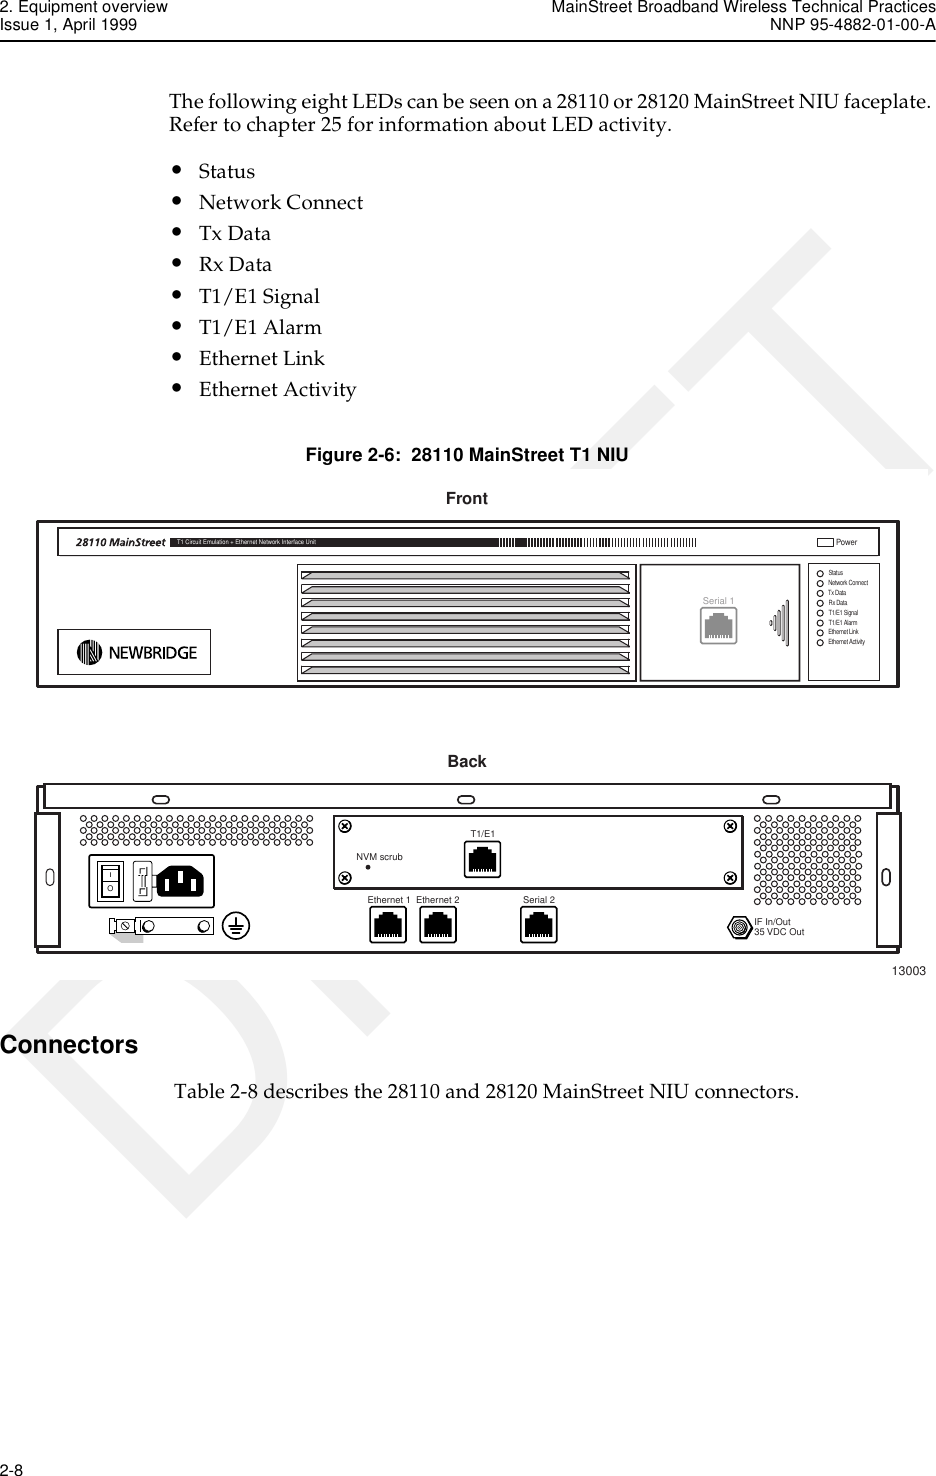 2. Equipment overview MainStreet Broadband Wireless Technical PracticesIssue 1, April 1999 NNP 95-4882-01-00-A2-8   DRAFTThe following eight LEDs can be seen on a 28110 or 28120 MainStreet NIU faceplate. Refer to chapter 25 for information about LED activity.•Status•Network Connect•Tx Data•Rx Data•T1/E1 Signal•T1/E1 Alarm•Ethernet Link•Ethernet ActivityFigure 2-6:  28110 MainStreet T1 NIUConnectors Table 2-8 describes the 28110 and 28120 MainStreet NIU connectors.T1 Circuit Emulation + Ethernet Network Interface UnitPowerStatusNetwork ConnectTx DataRx DataT1/E1 Alarm T1/E1 Signal Ethernet Link Ethernet Activity FrontBack13003OIIF In/Out35 VDC OutEthernet 1NVM scrubEthernet 2 Serial 2Serial 1T1/E1